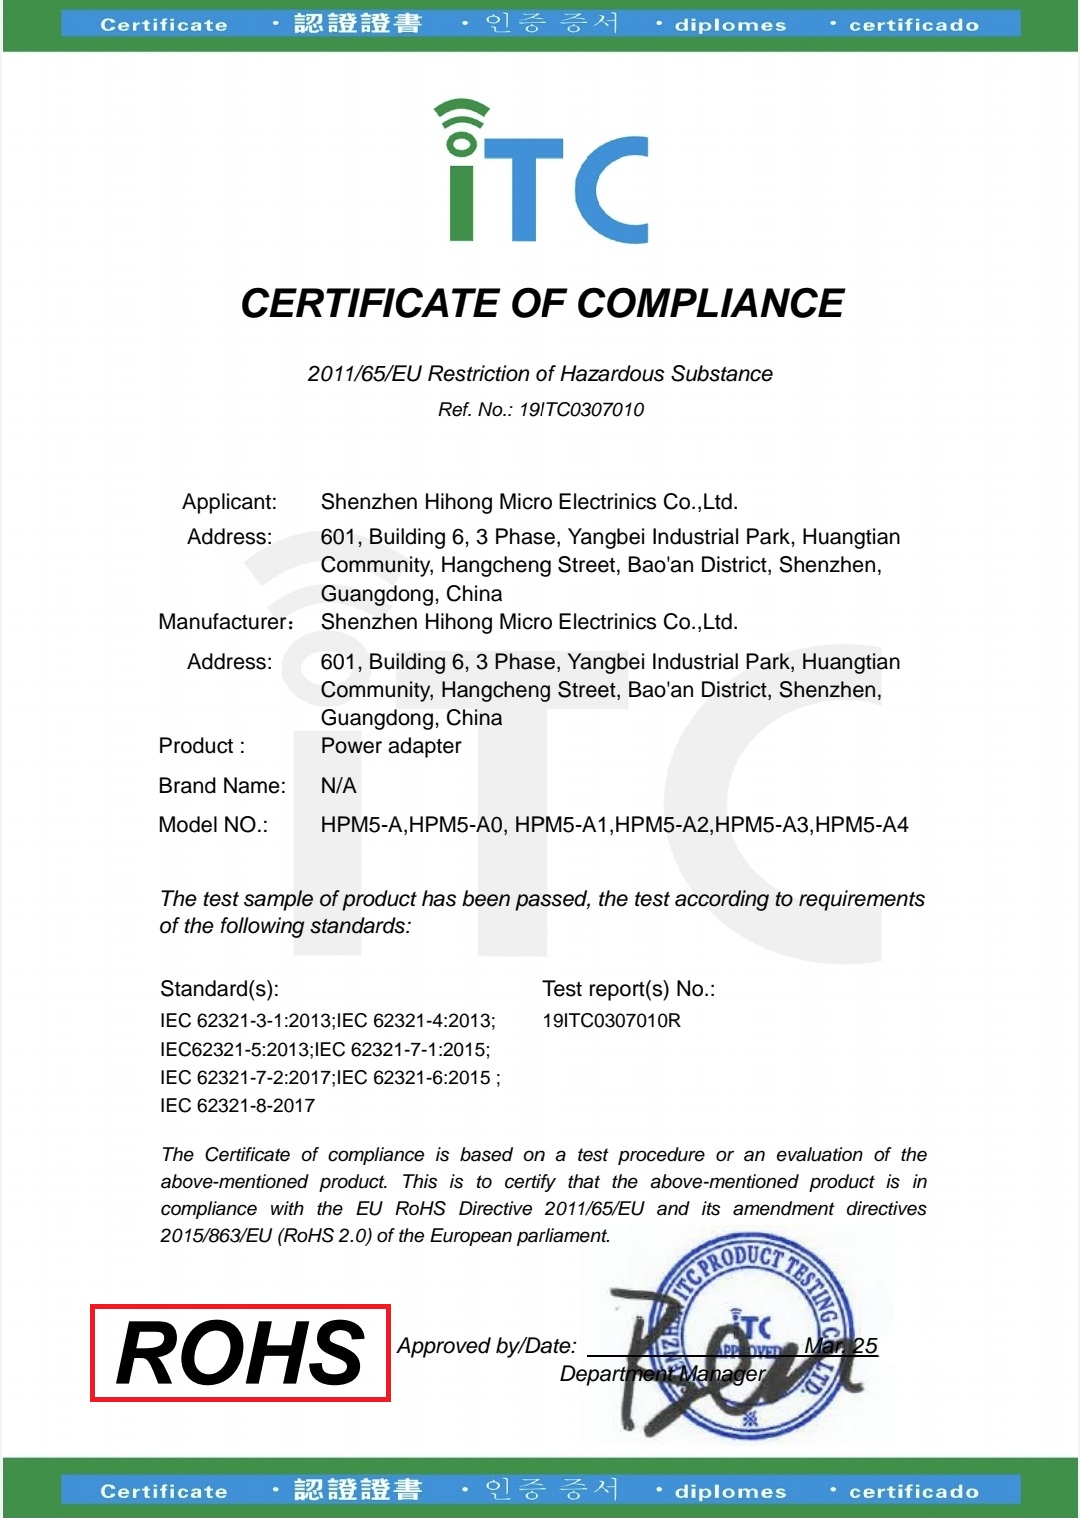 REGO Communication Sdn Bhd - Rock Space | Our Certificate